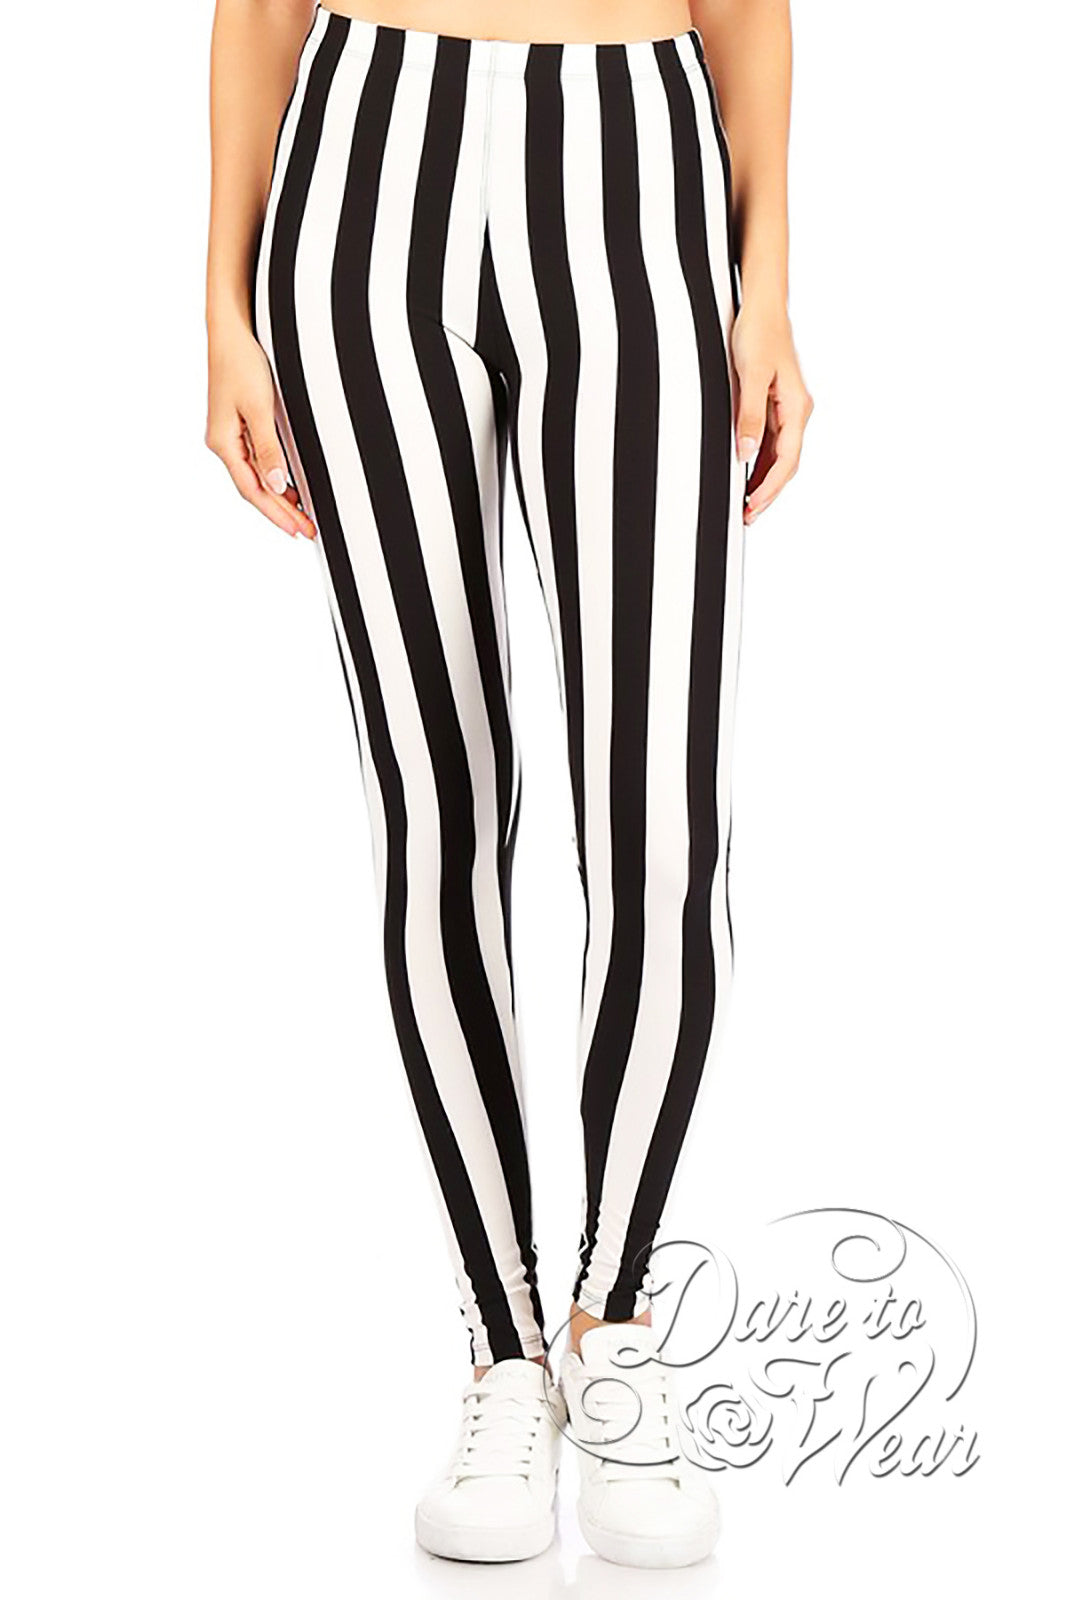 Peached Leggings in Beetlejuice  Black White Vertically Striped Tights -  Dare Fashion Globe